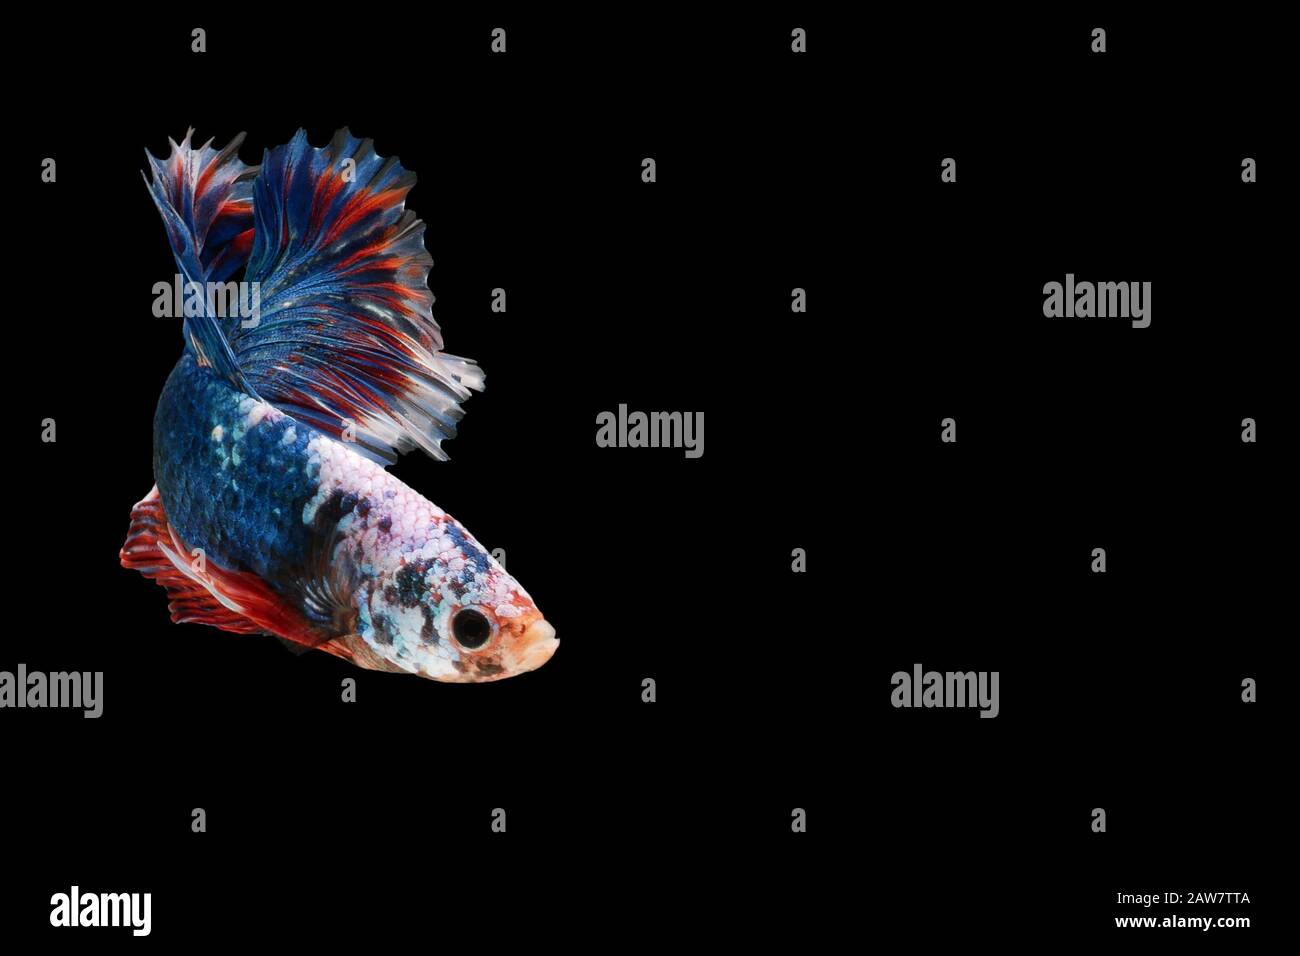 beautiful dark blue Thai fighting fish swimming with long fins and red white colorful long tail gene. fighting fish isolated on black background. Stock Photo